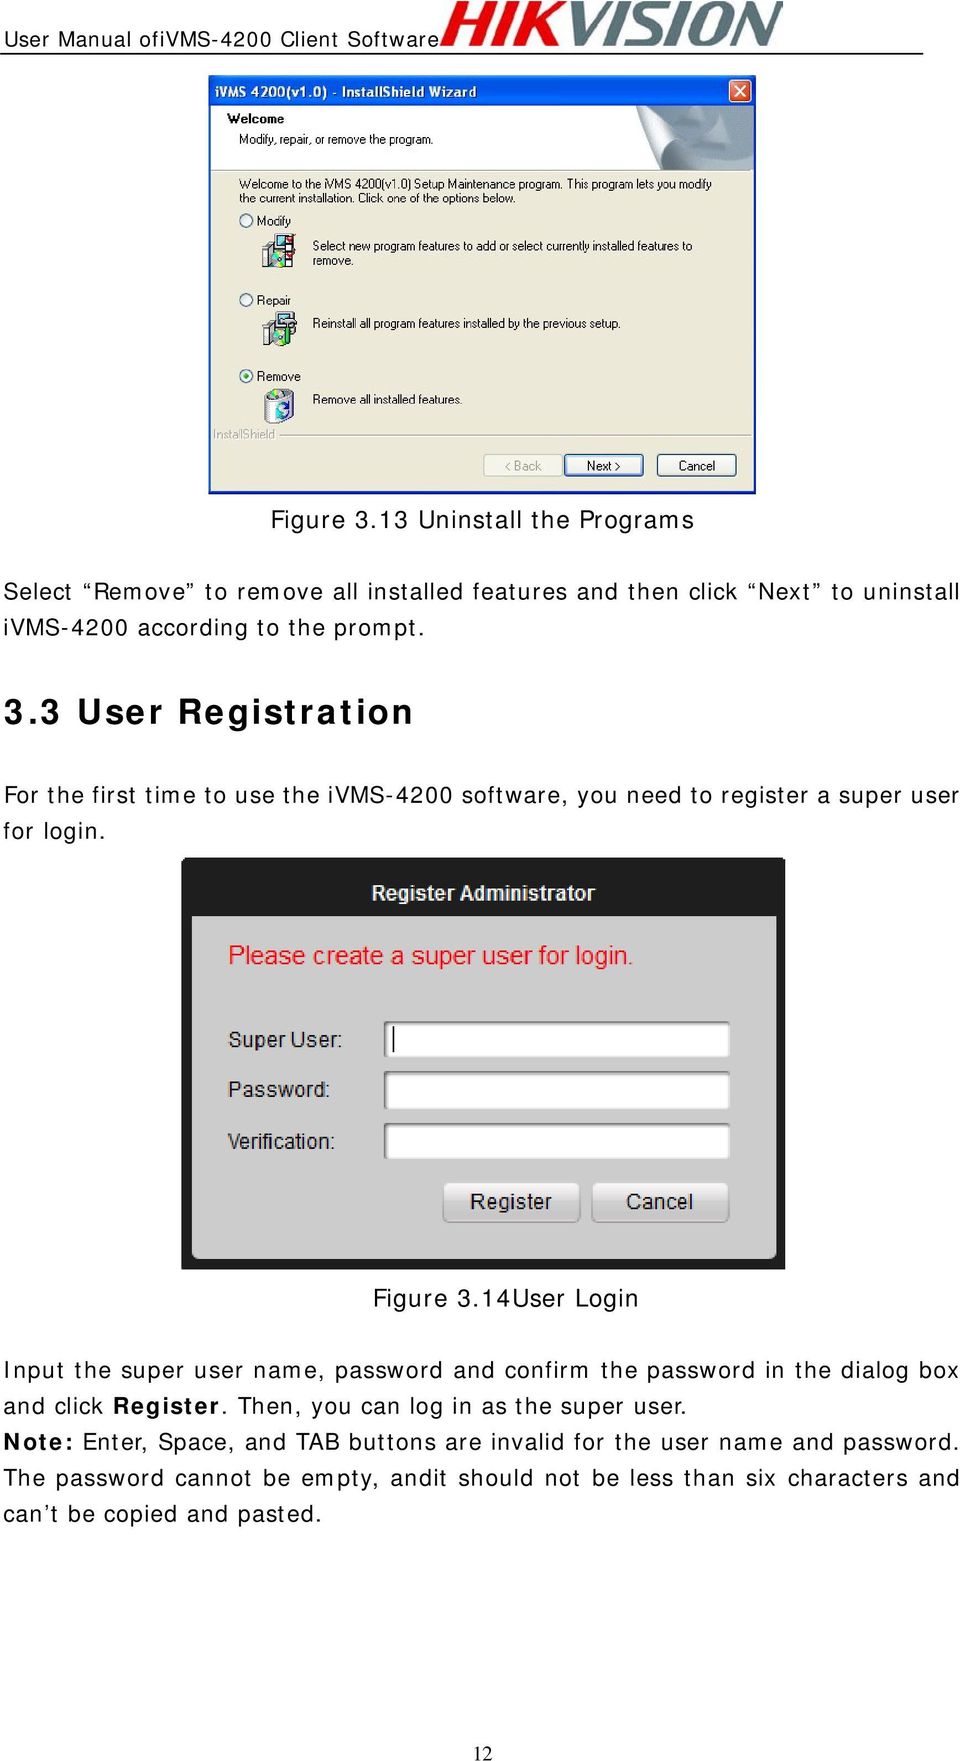 Then, you can log in as the super user. Note: Enter, Space, and TAB buttons are invalid for the user name and password.